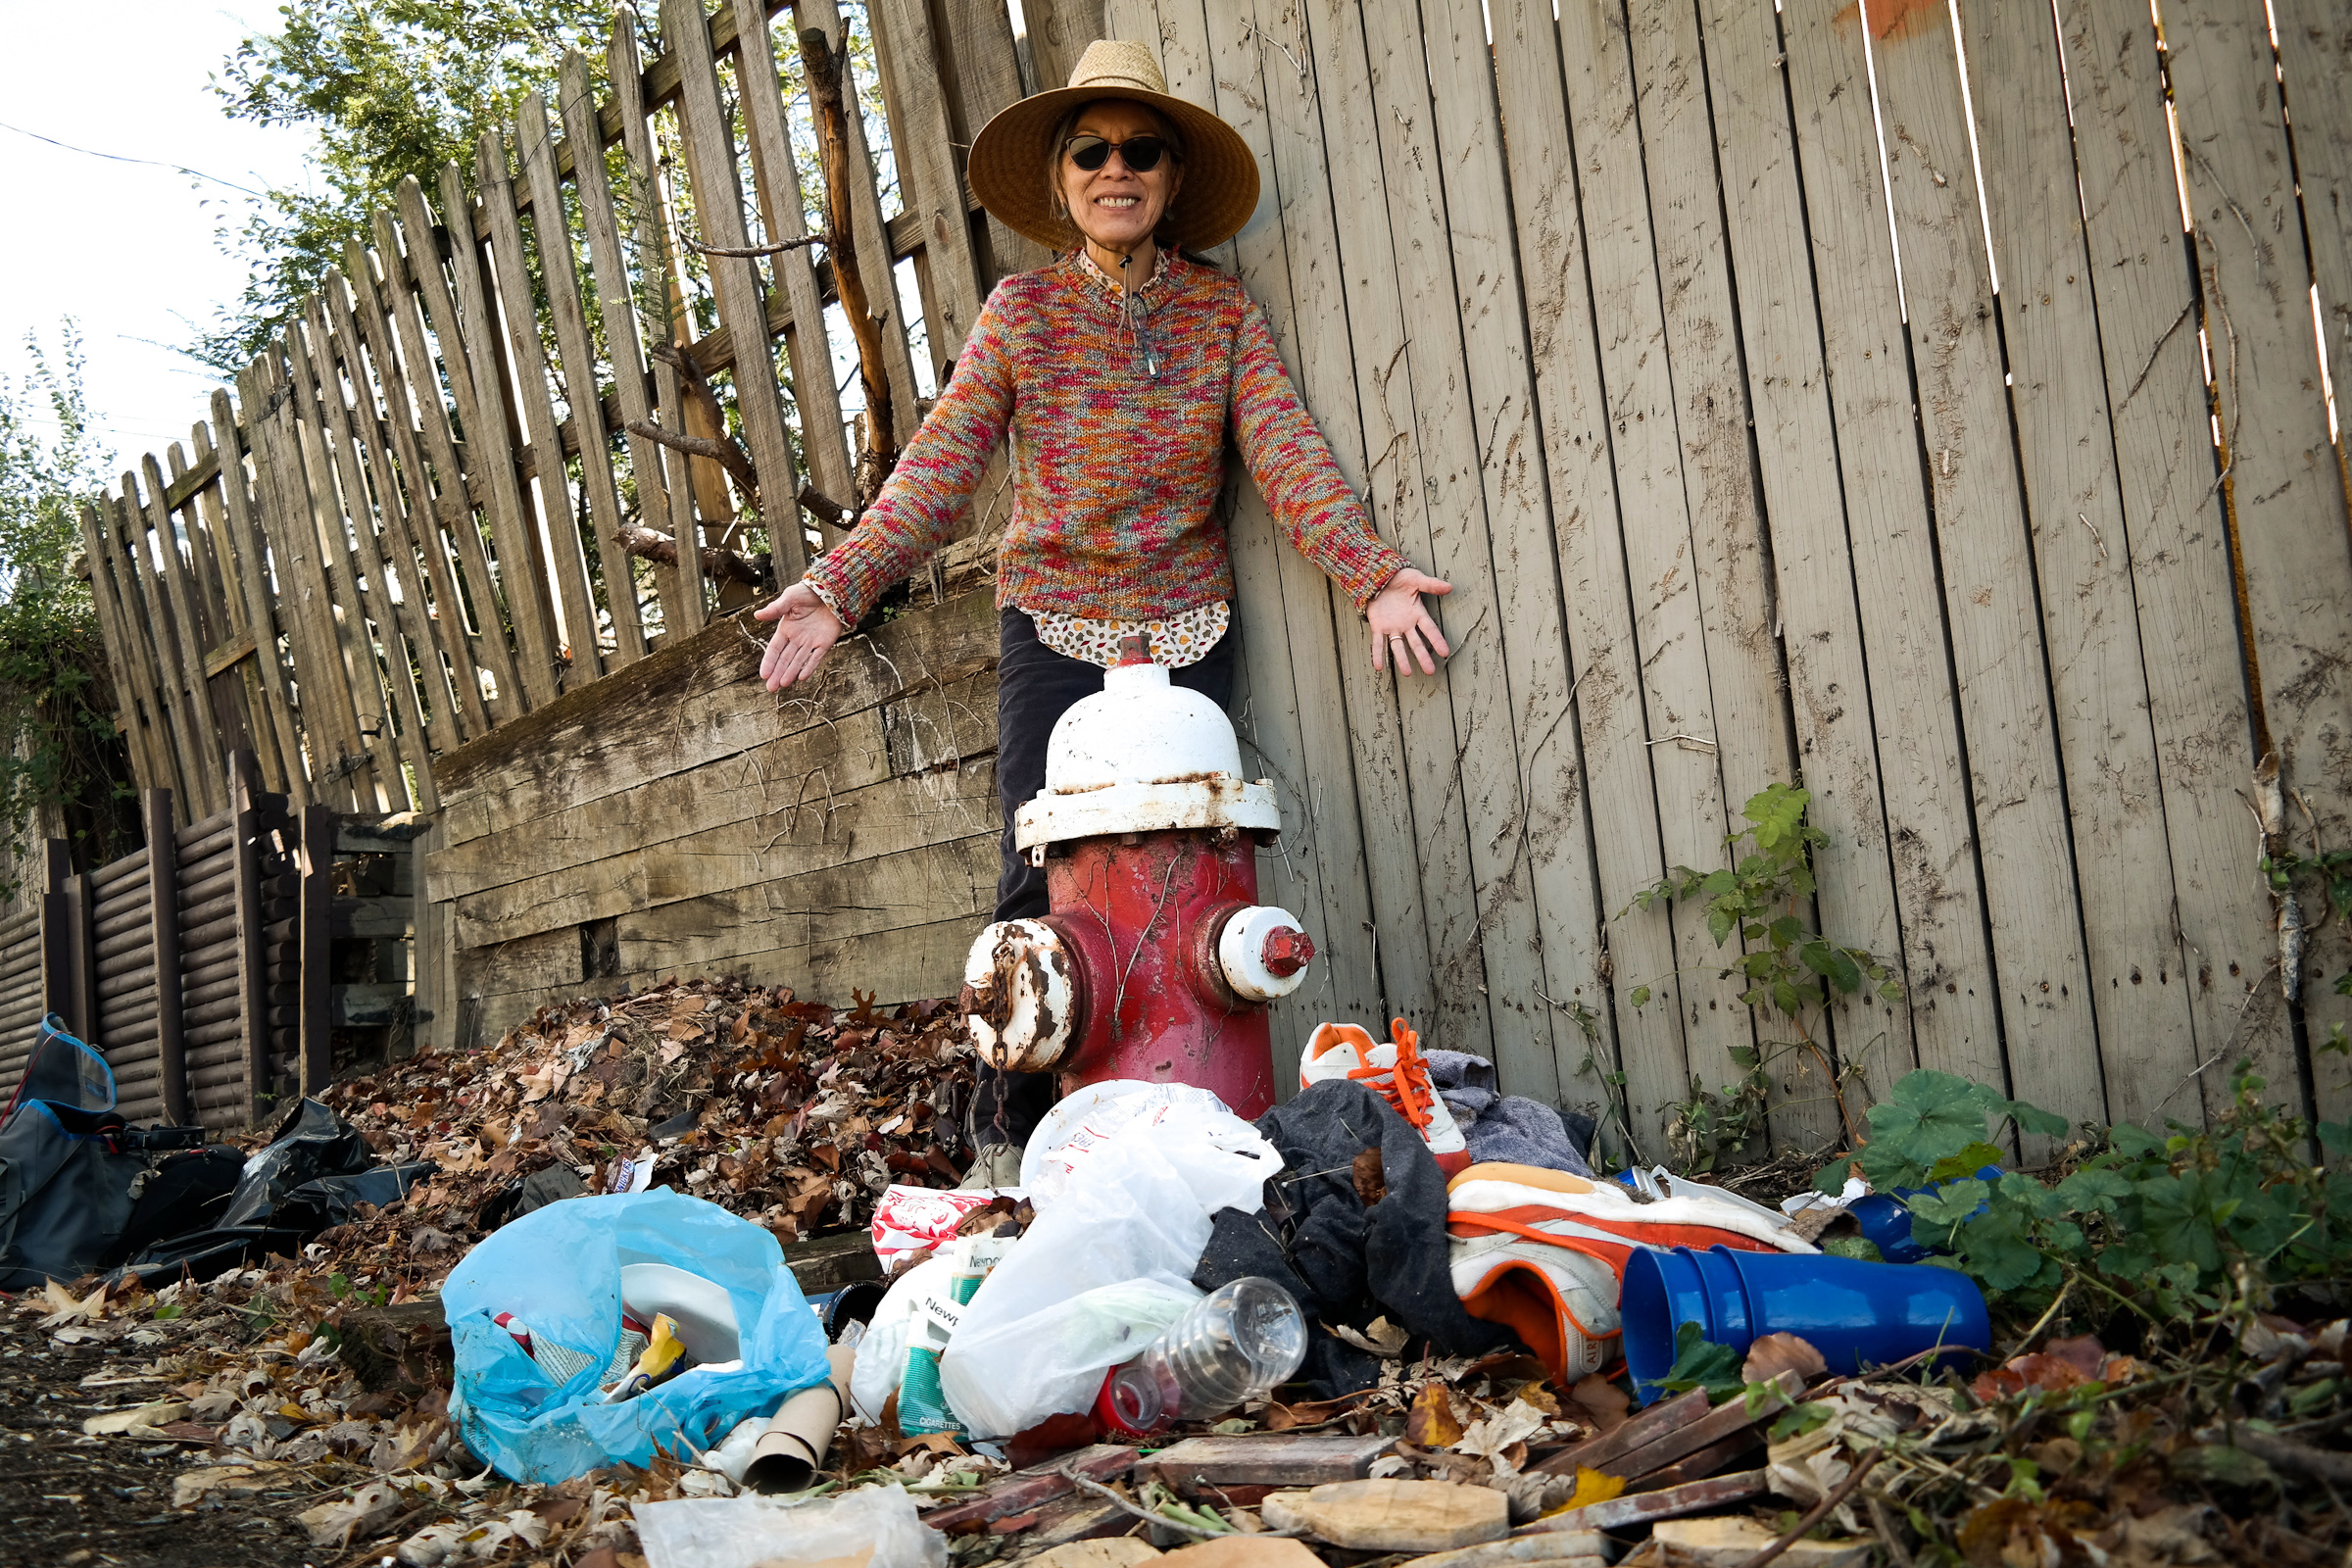 Meet the trash heap in the alleyway behind Pittsburgher Meda Rago's house. Rago regularly volunteers with her neighborhood's clean-up crew, but it doesn't seem to make a dent in the litter problem. Photo: Lou Blouin